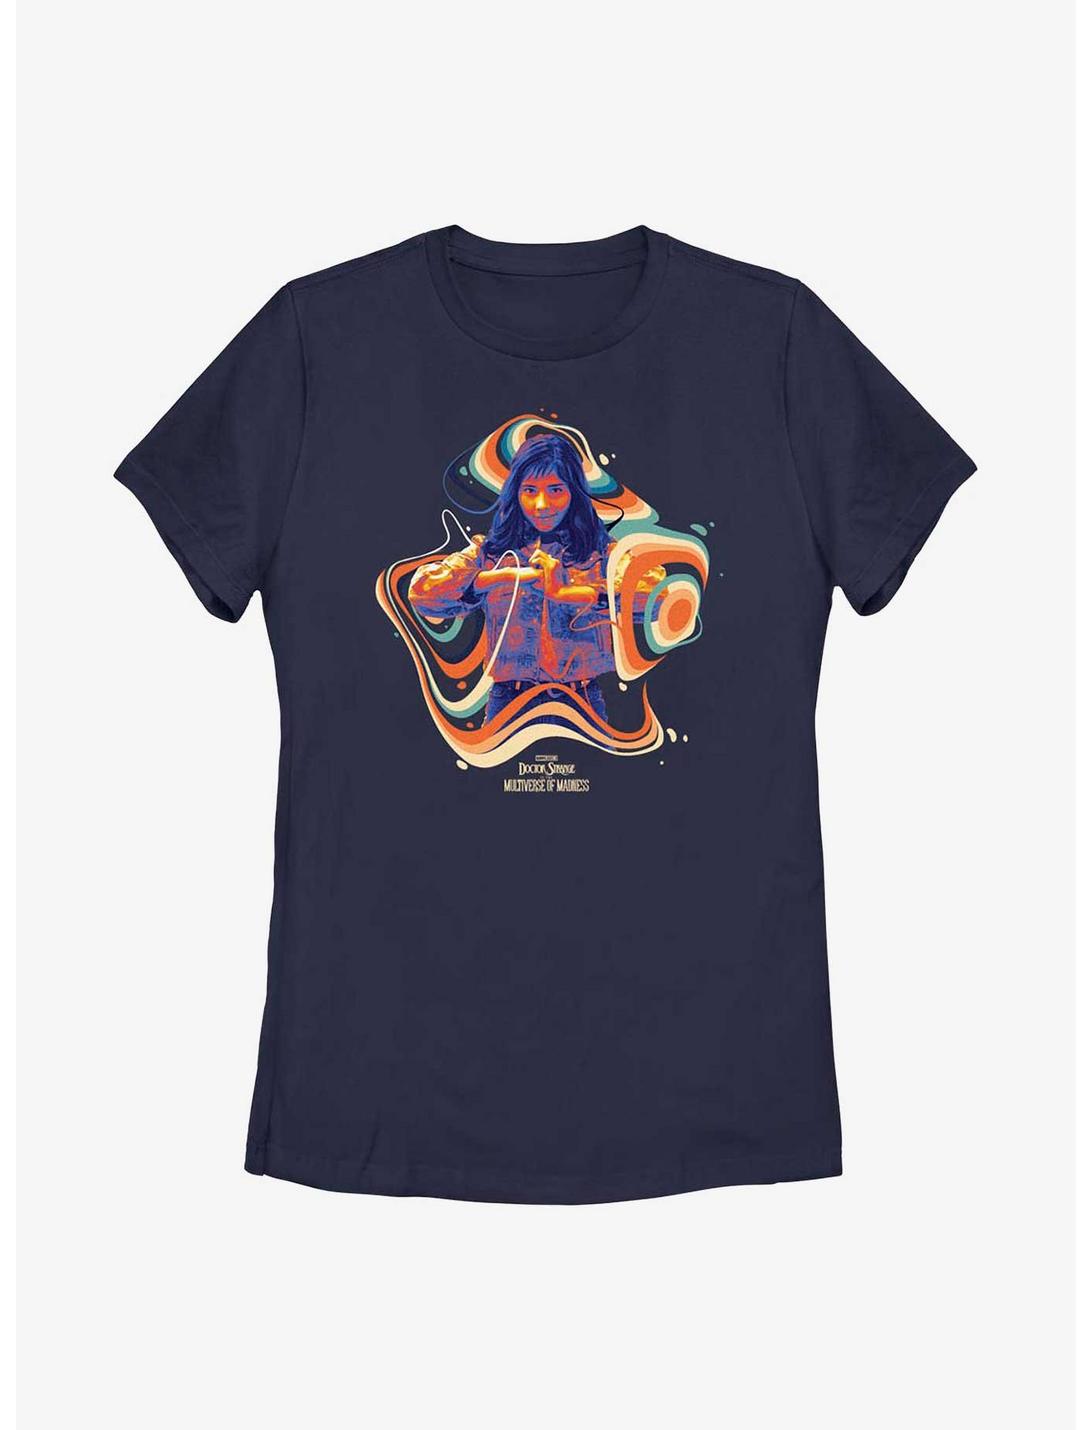 Marvel Doctor Strange In The Multiverse Of Madness Chavez Groovy Womens T-Shirt, NAVY, hi-res